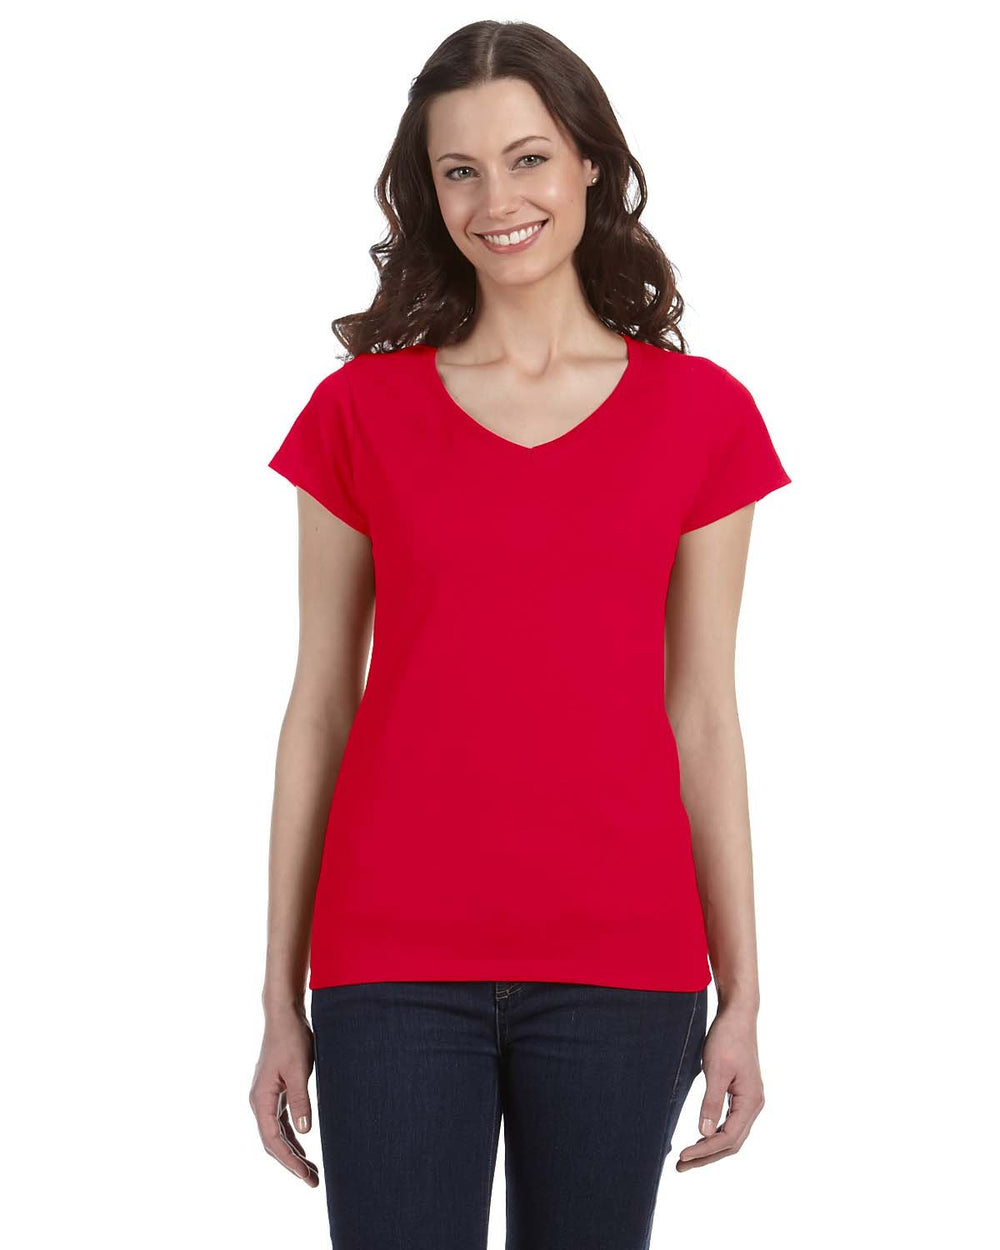 Gildan Ladies SoftStyle Fitted V-Neck T-Shirt - G640VL